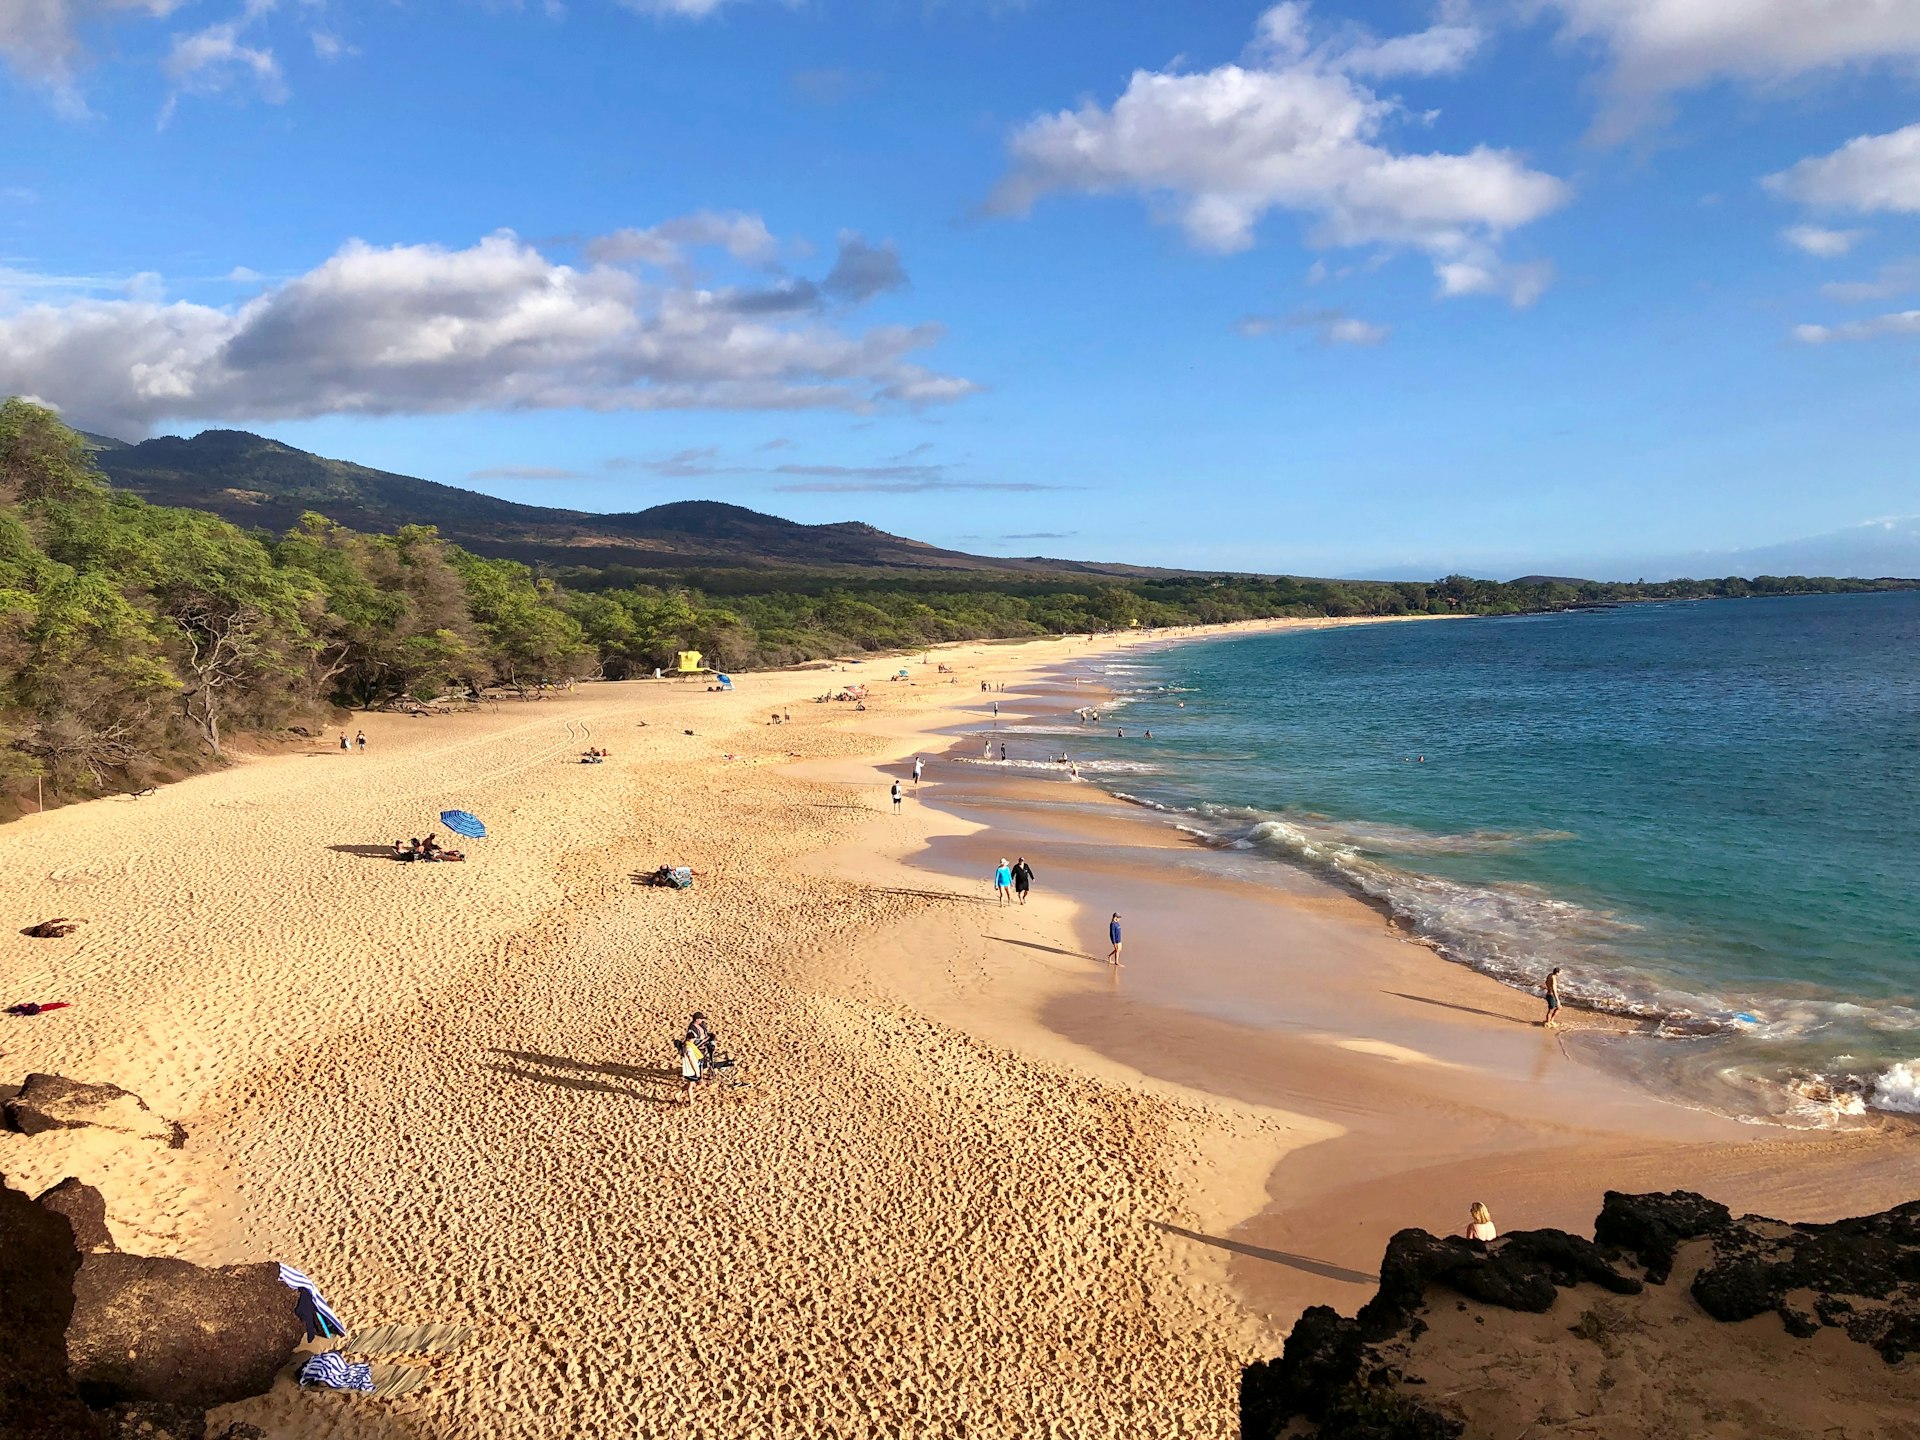 A wideangle of a large golden-sand beach